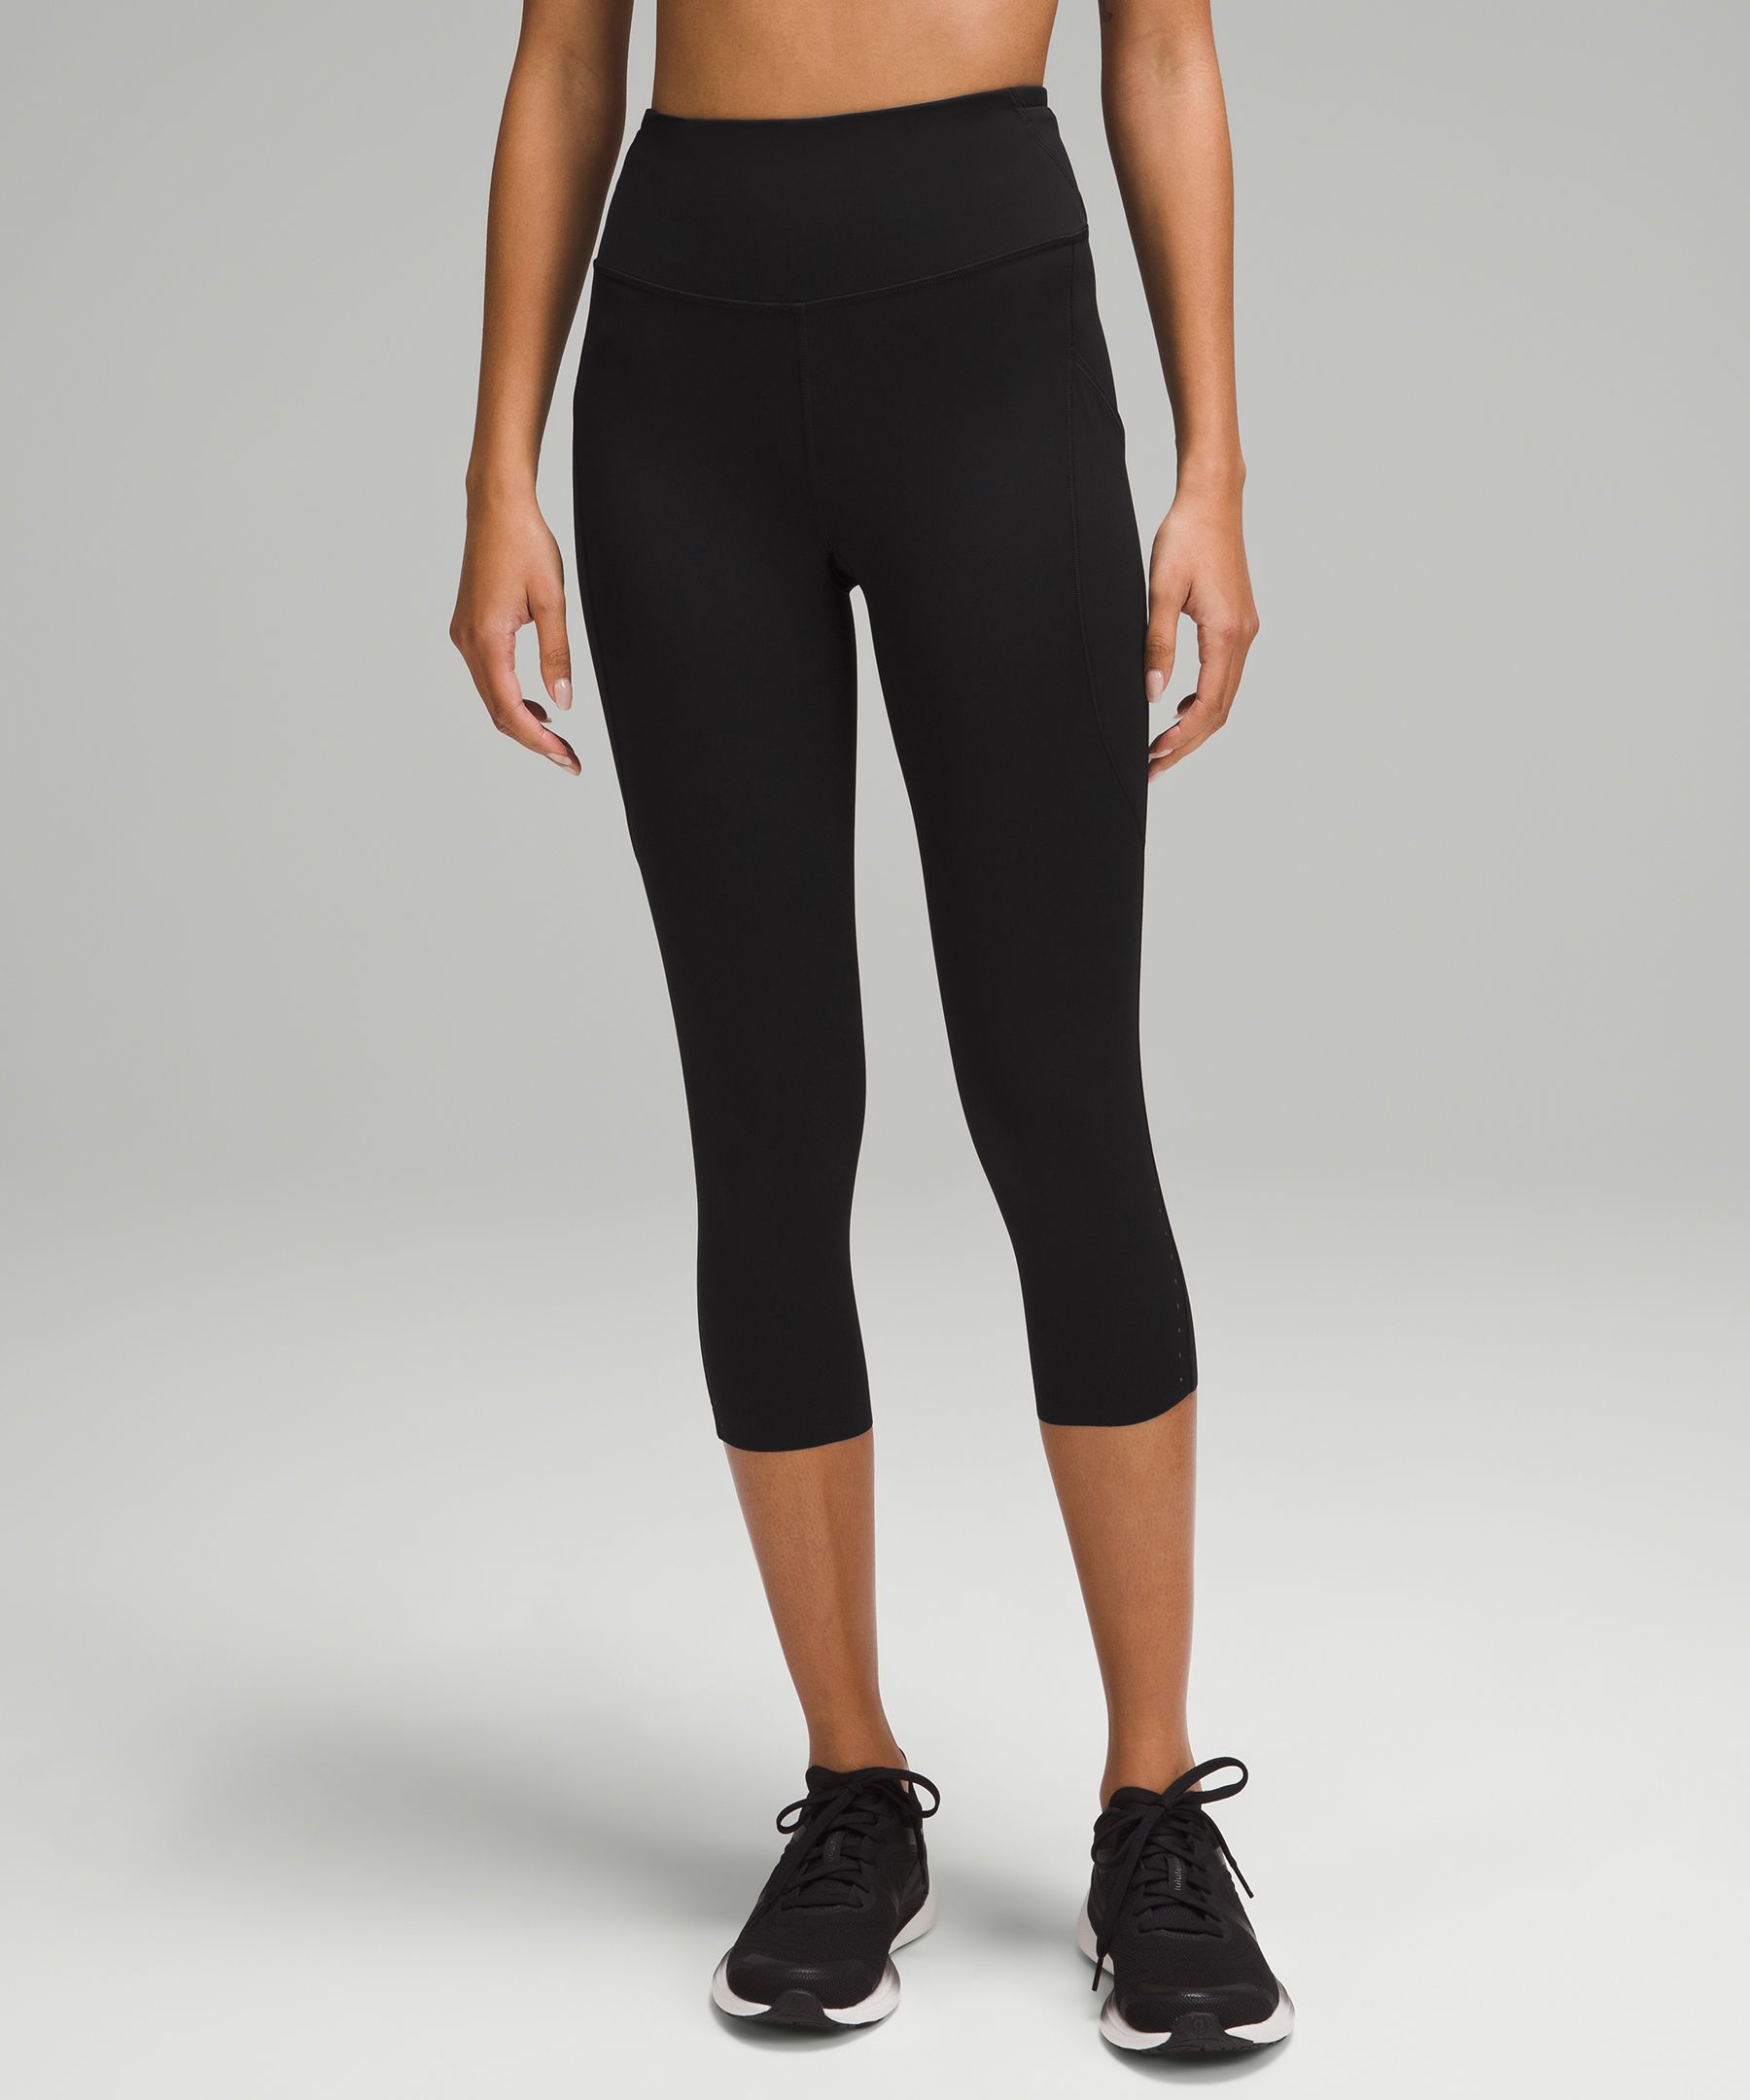 Lululemon athletica Fast and Free High-Rise Crop 19, Women's Capris